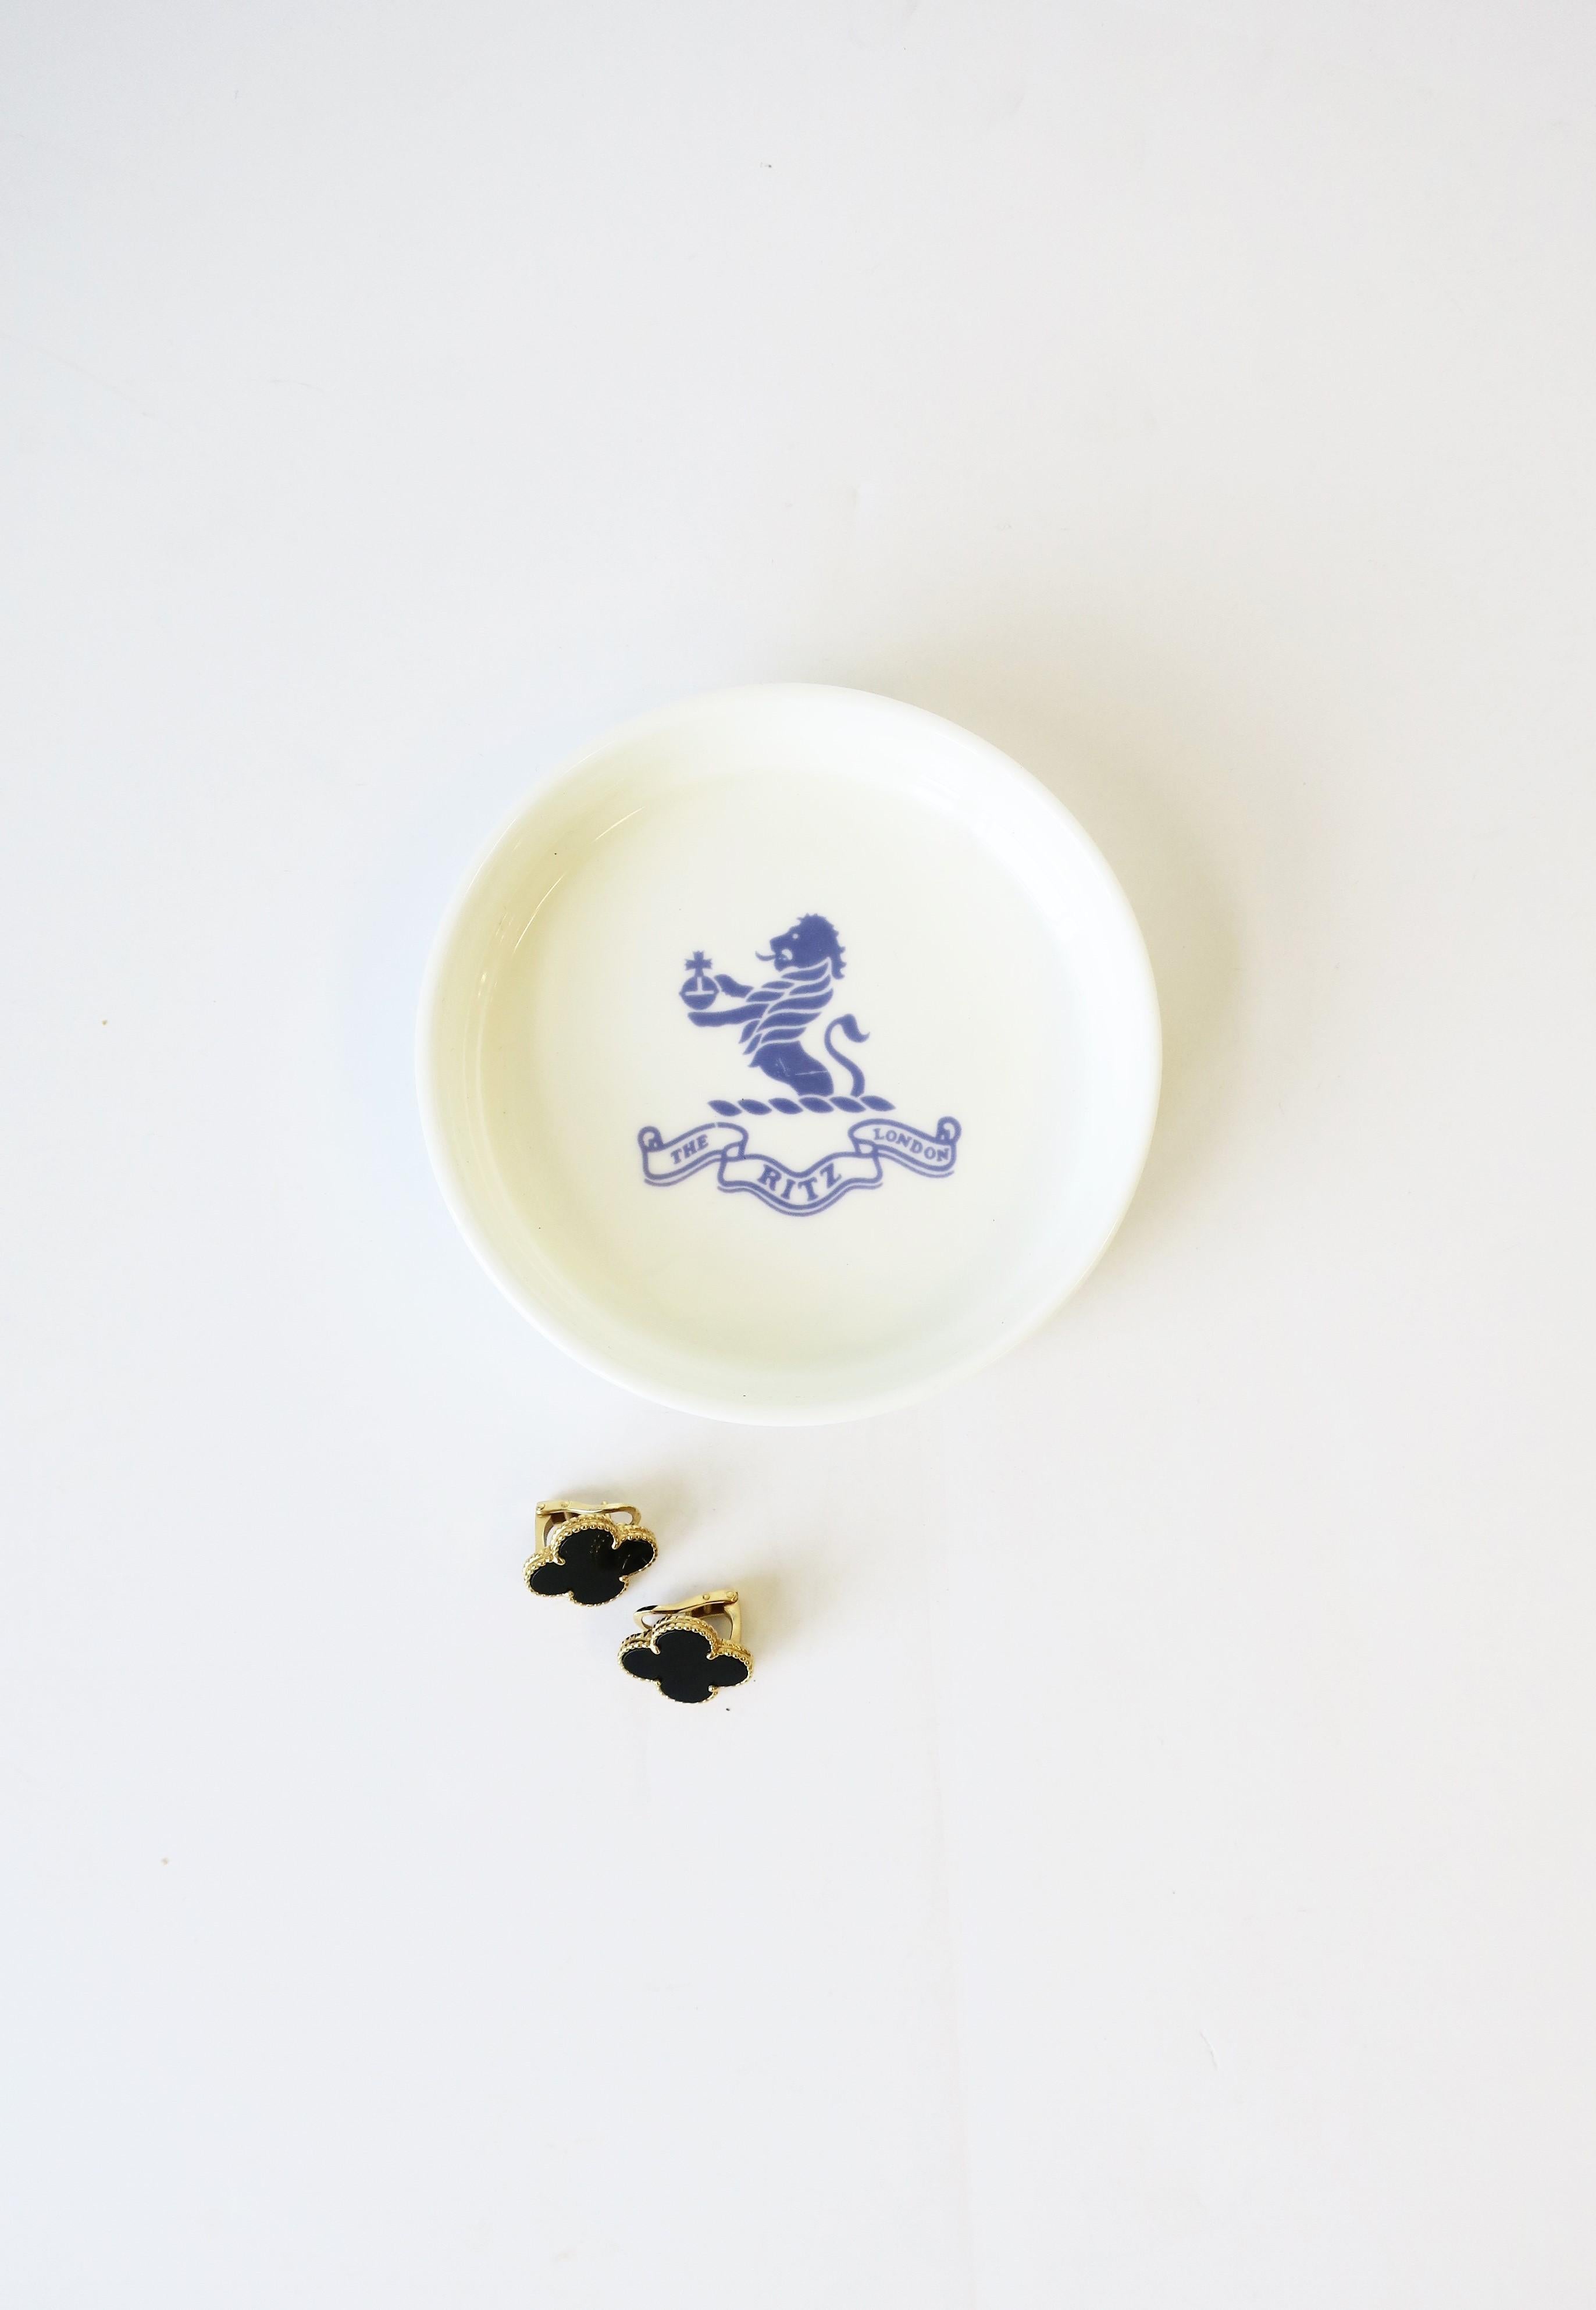 Glazed The Ritz Hotel London Blue and White Porcelain Jewelry Dish by Royal Doulton